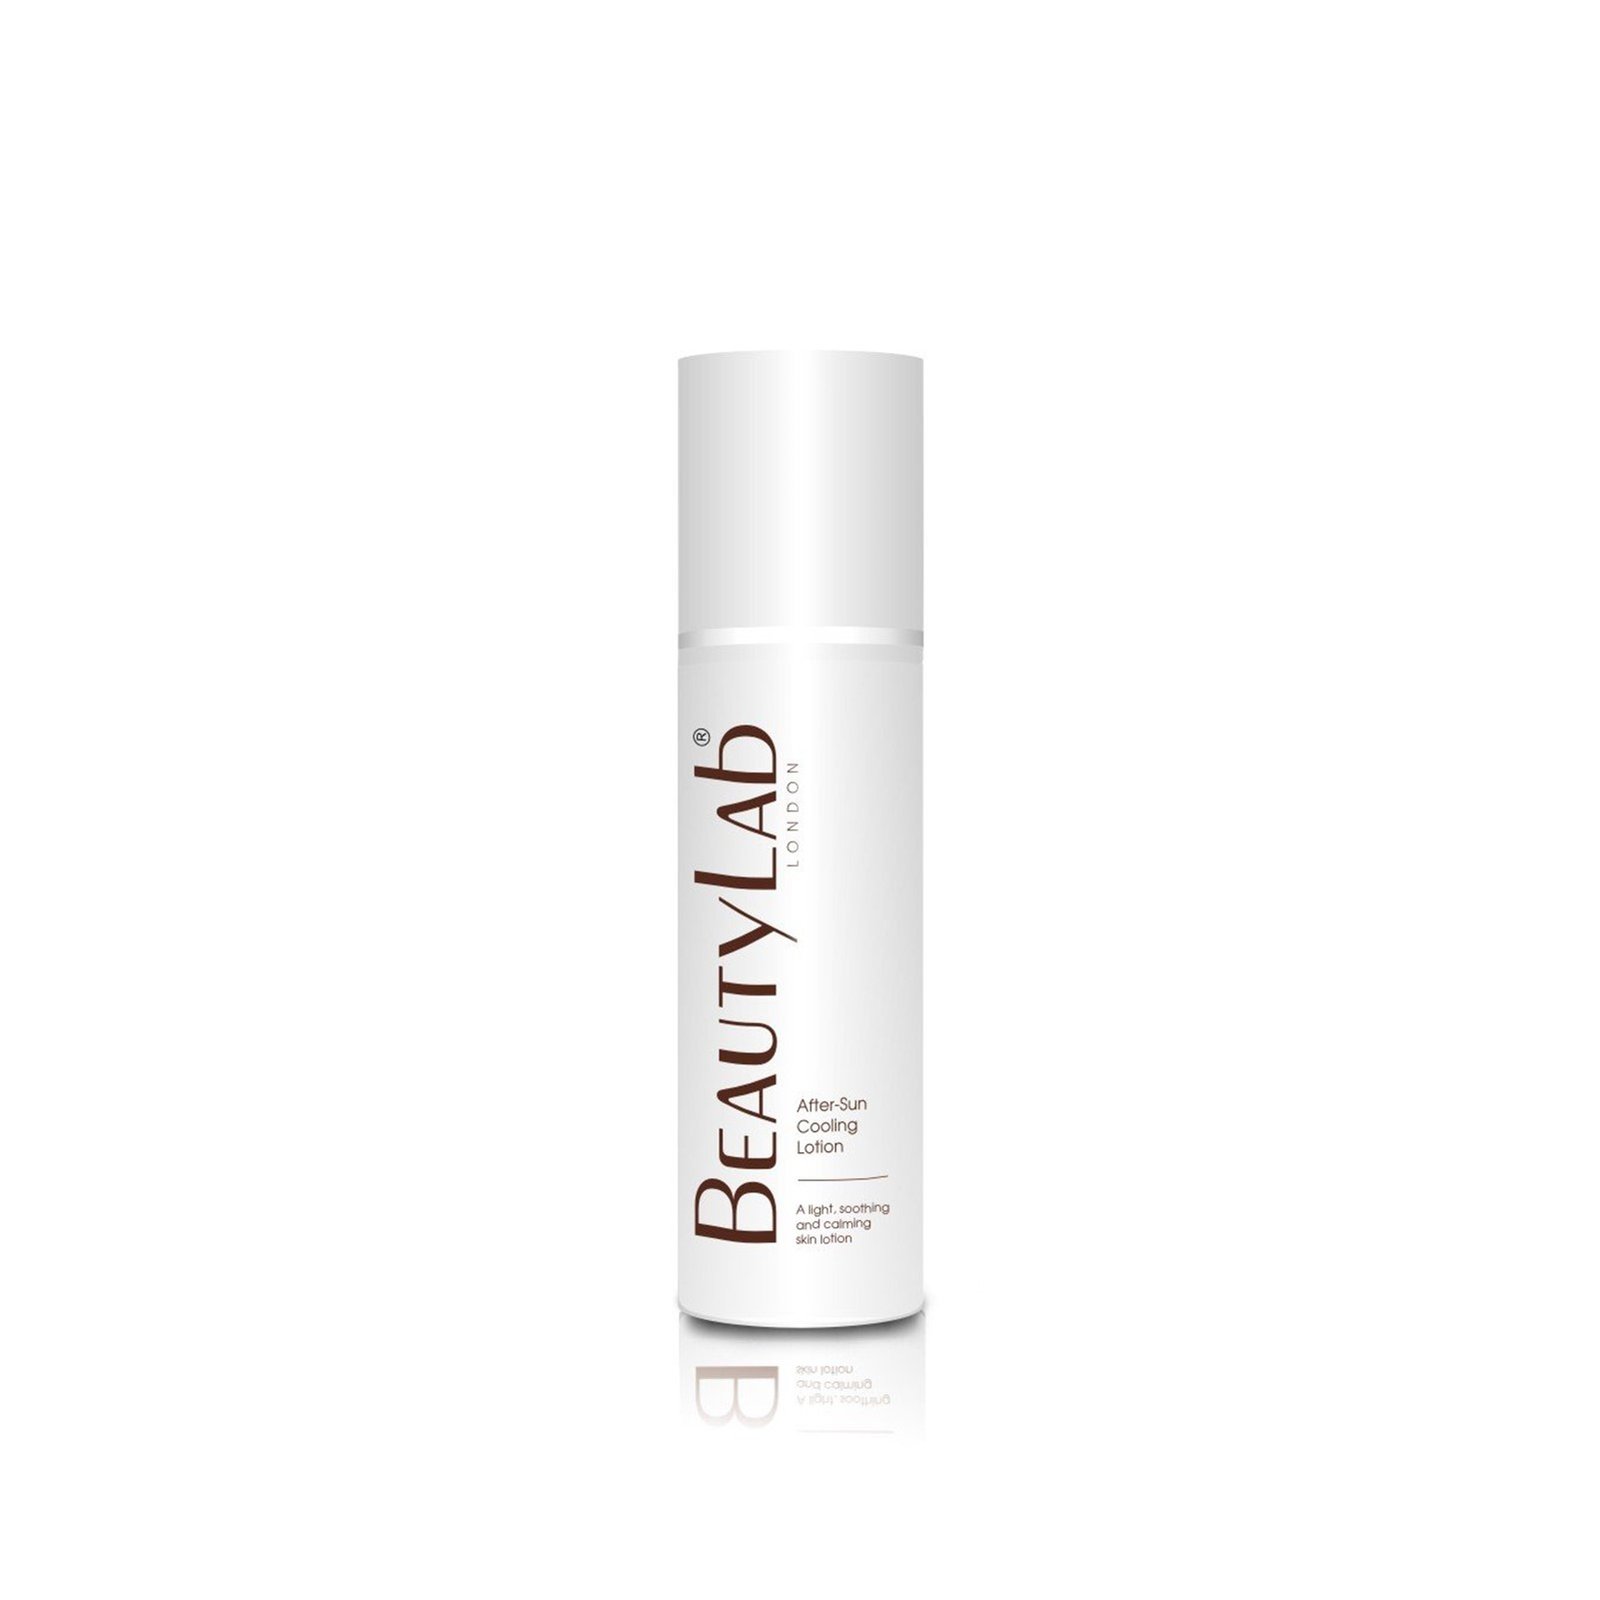 BeautyLab After-Sun Cooling Lotion 200ml